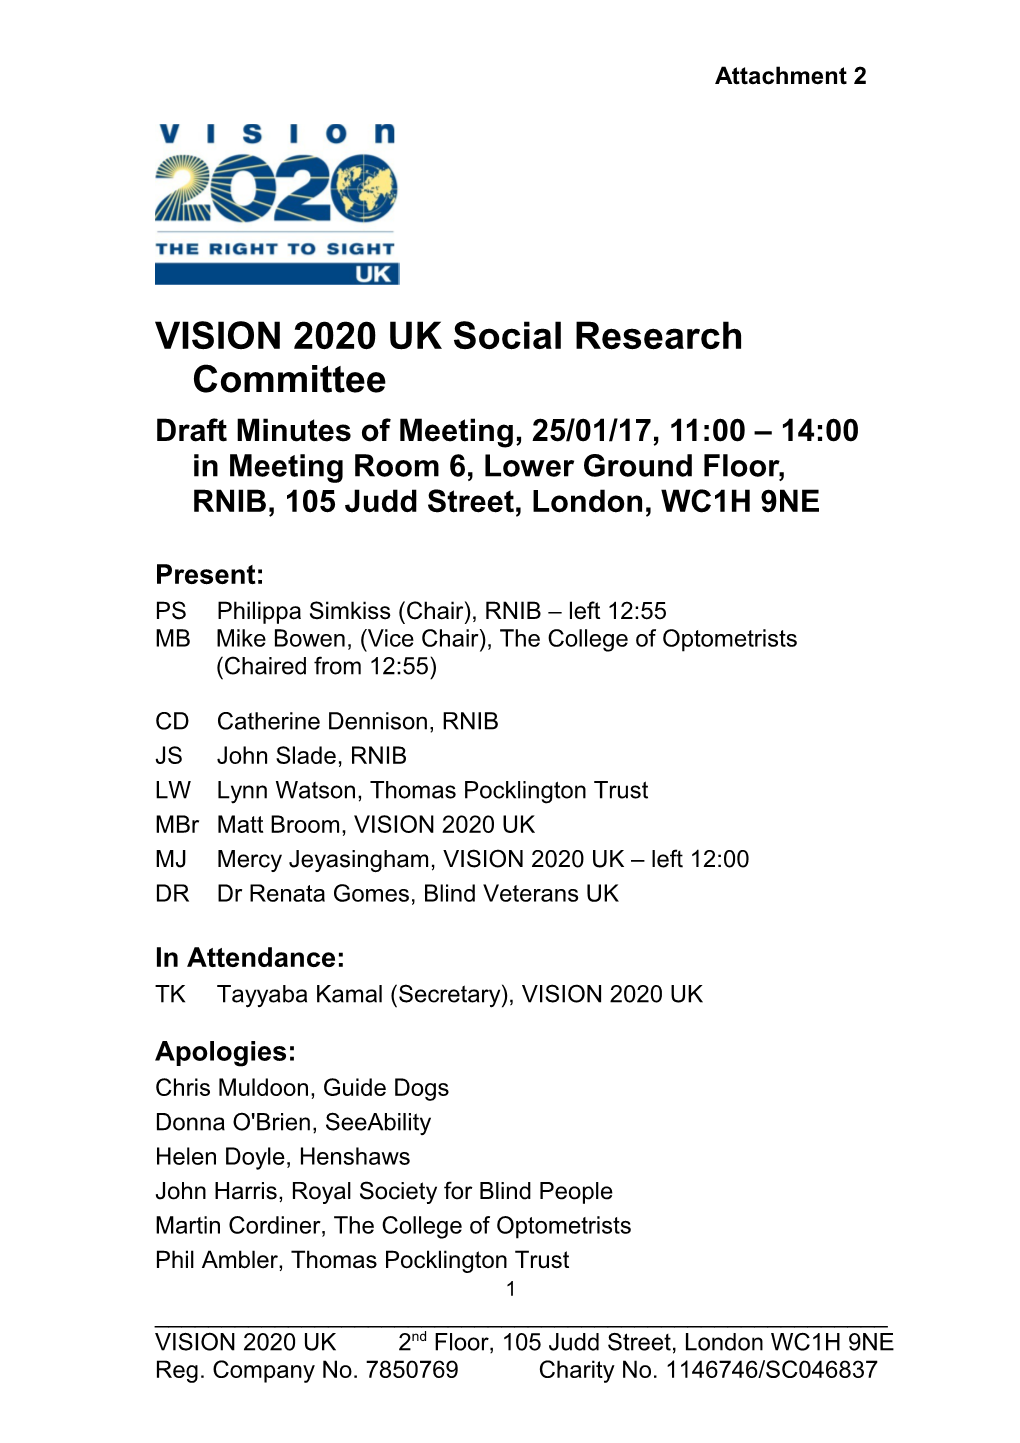 VISION 2020 UK Social Research Committee